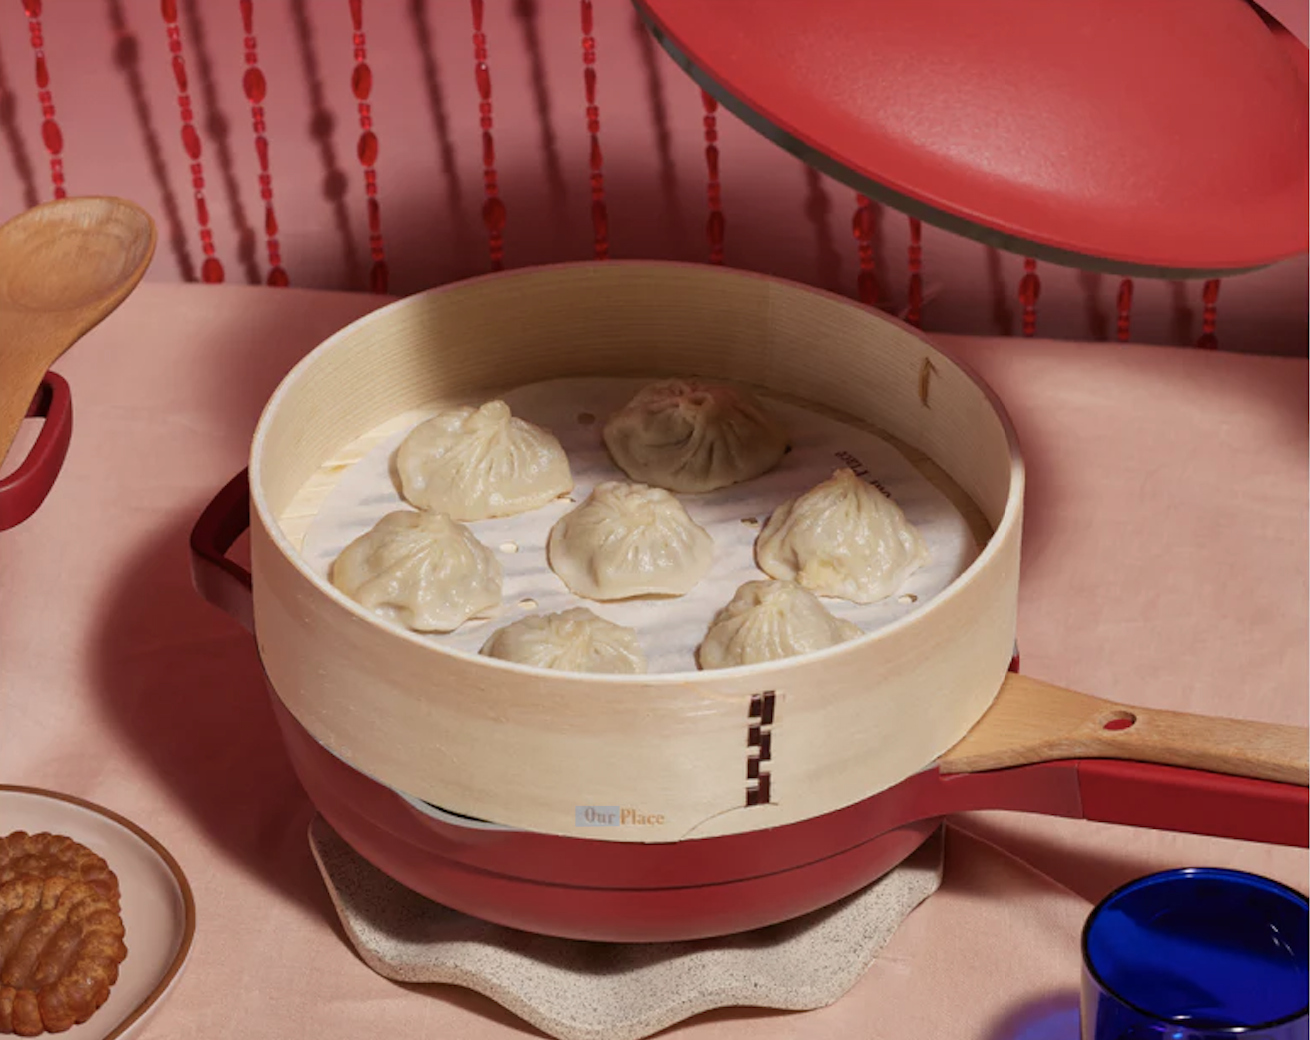 the pan with the basket steamer and dumplings inside